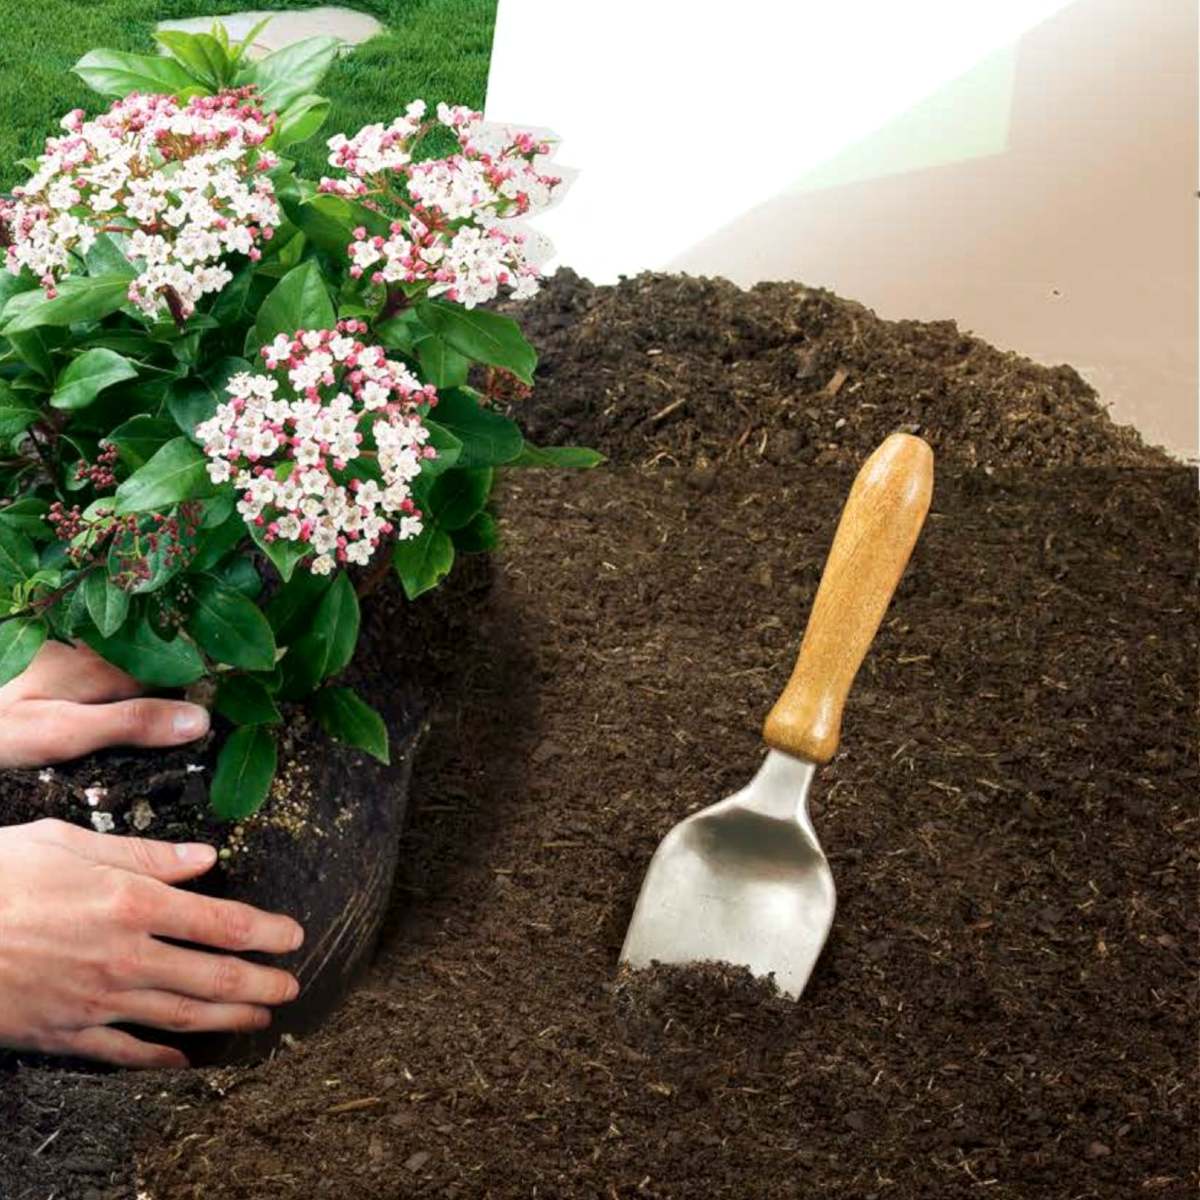 Planting a flower with soil mix or compost makes a difference.